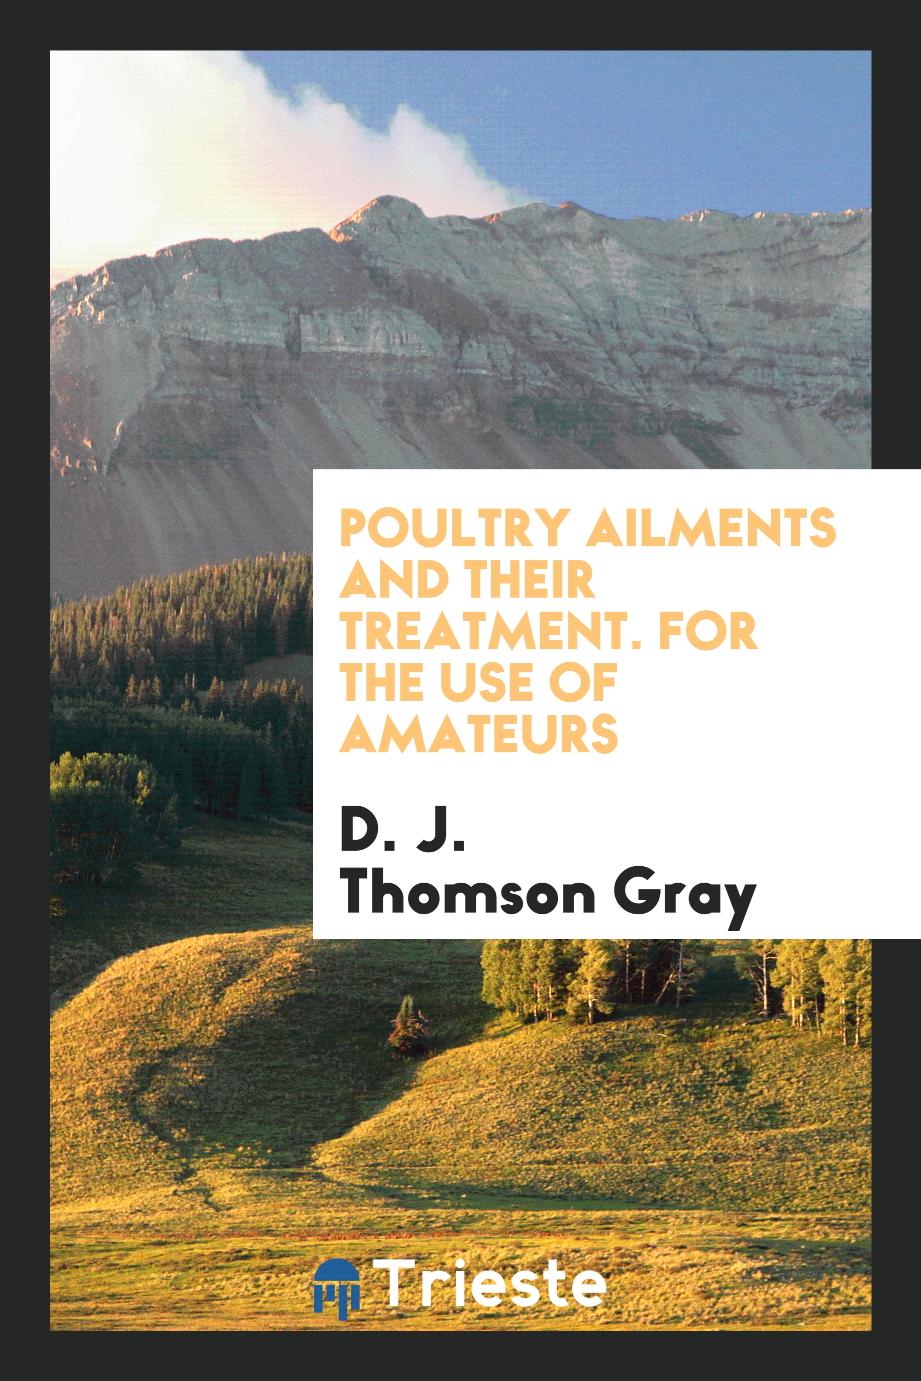 Poultry Ailments and Their Treatment. For the Use of Amateurs